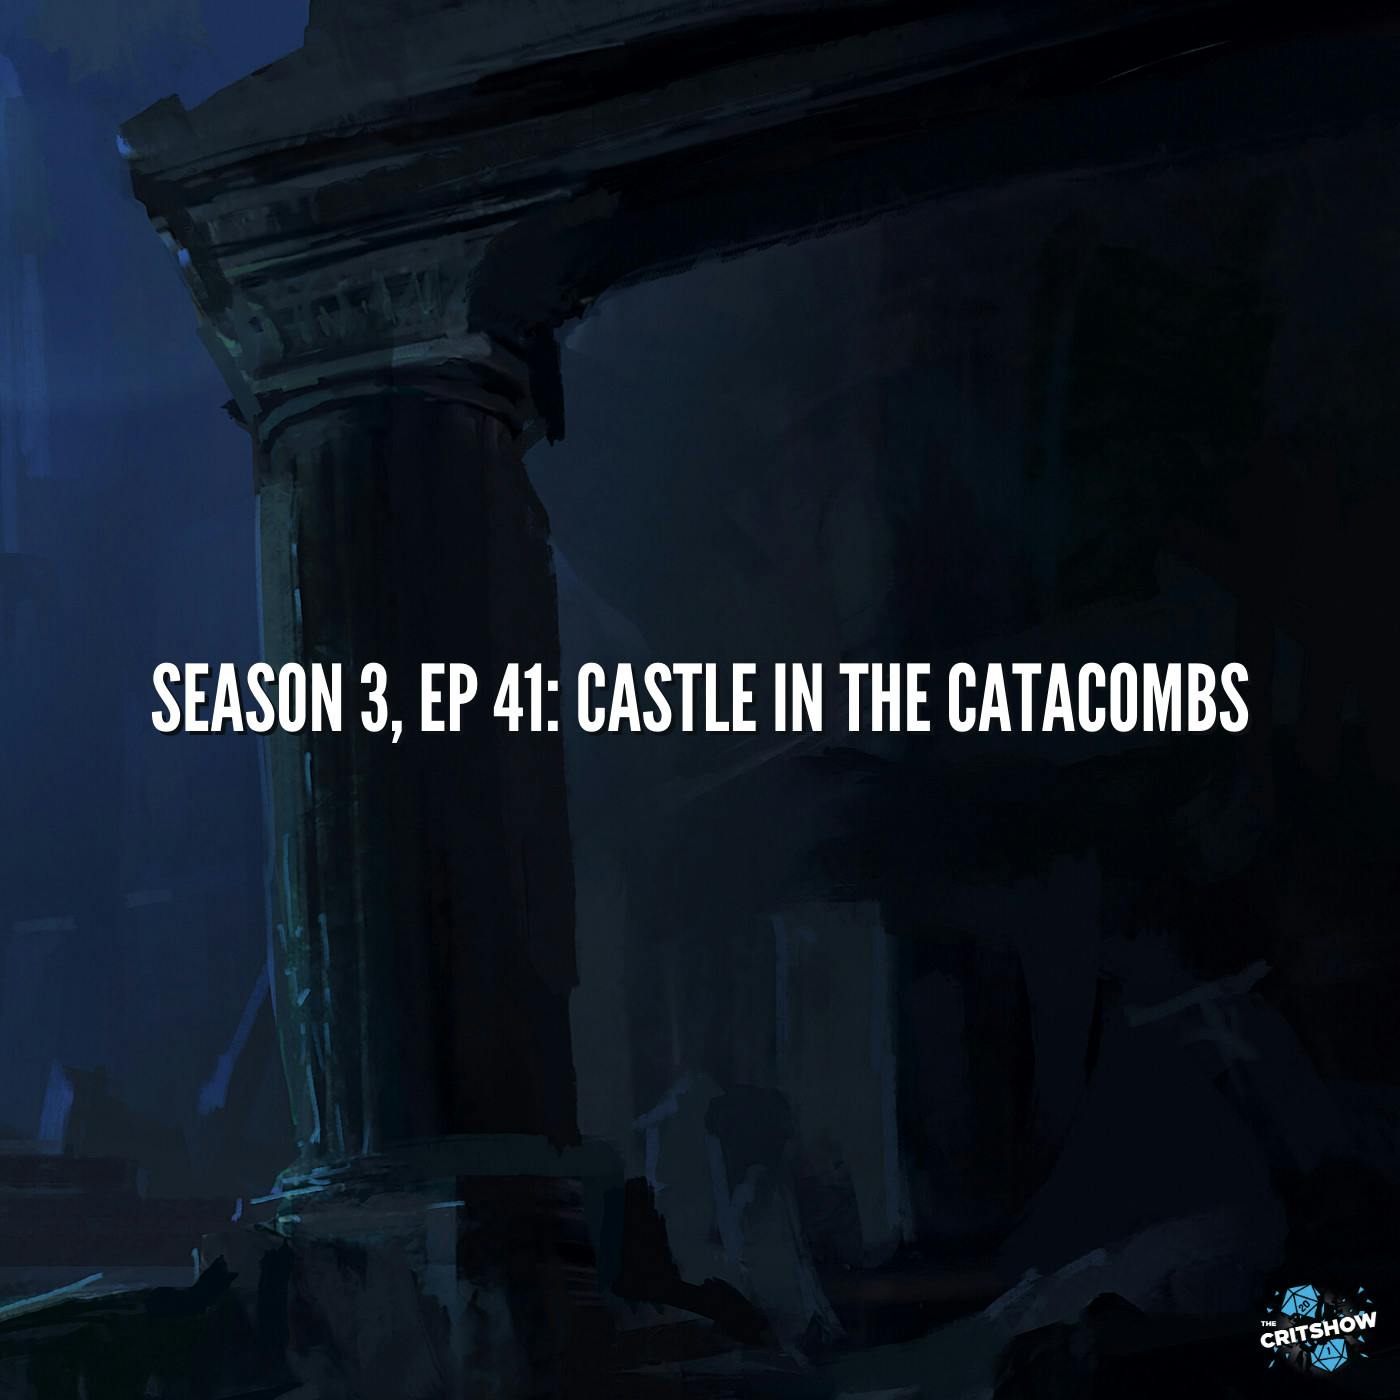 Castle in the Catacombs (S3, E41)